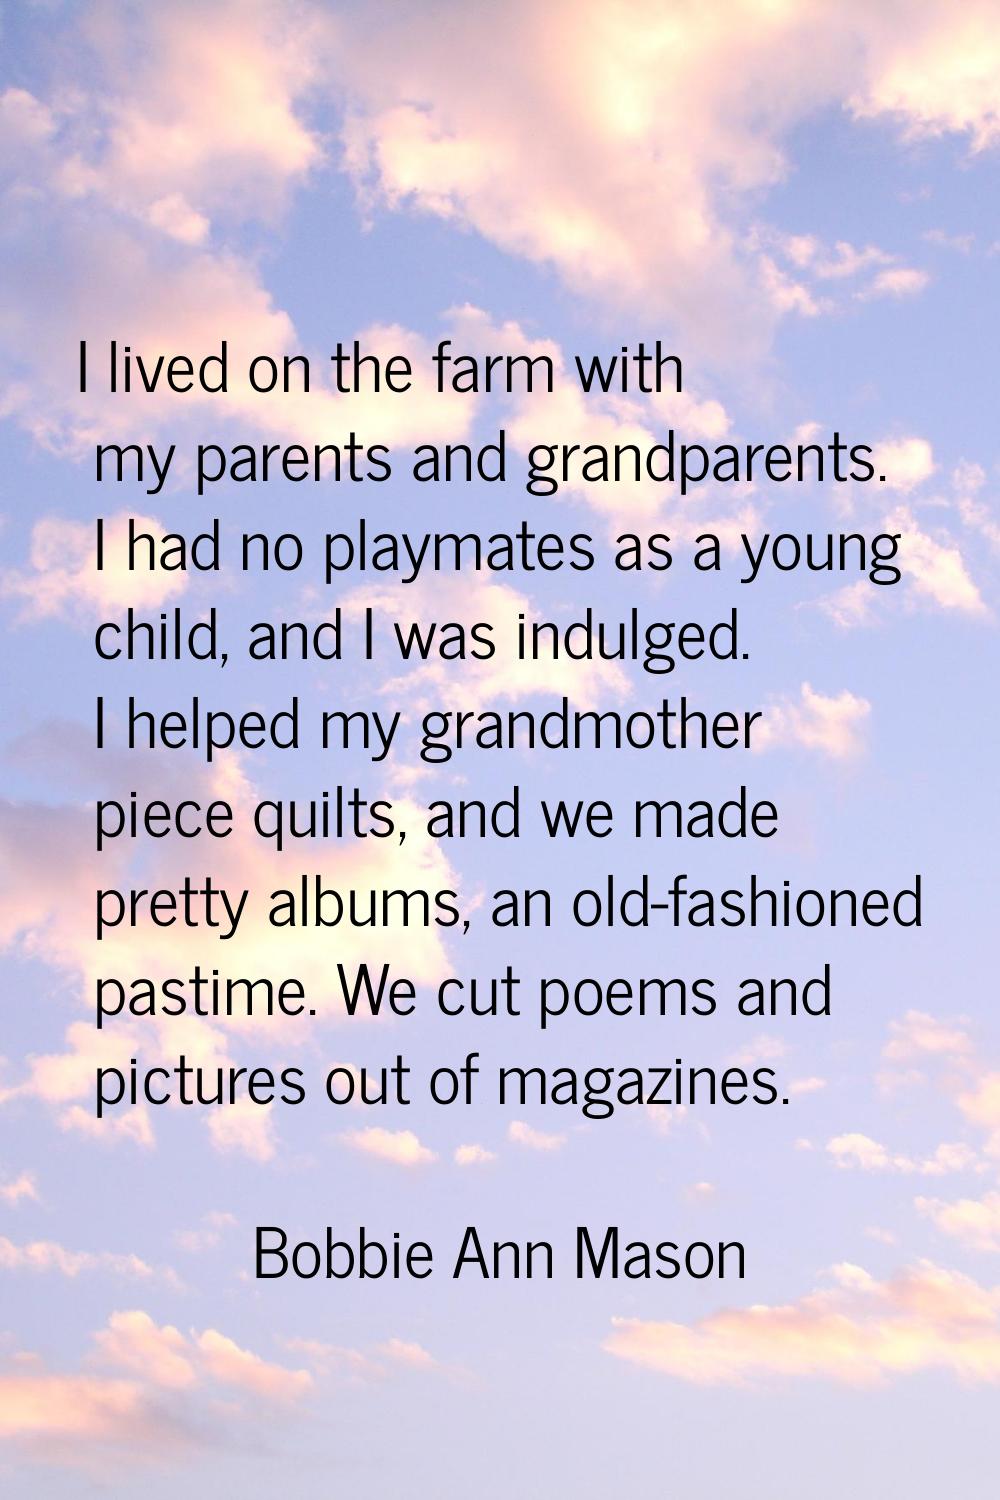 I lived on the farm with my parents and grandparents. I had no playmates as a young child, and I wa